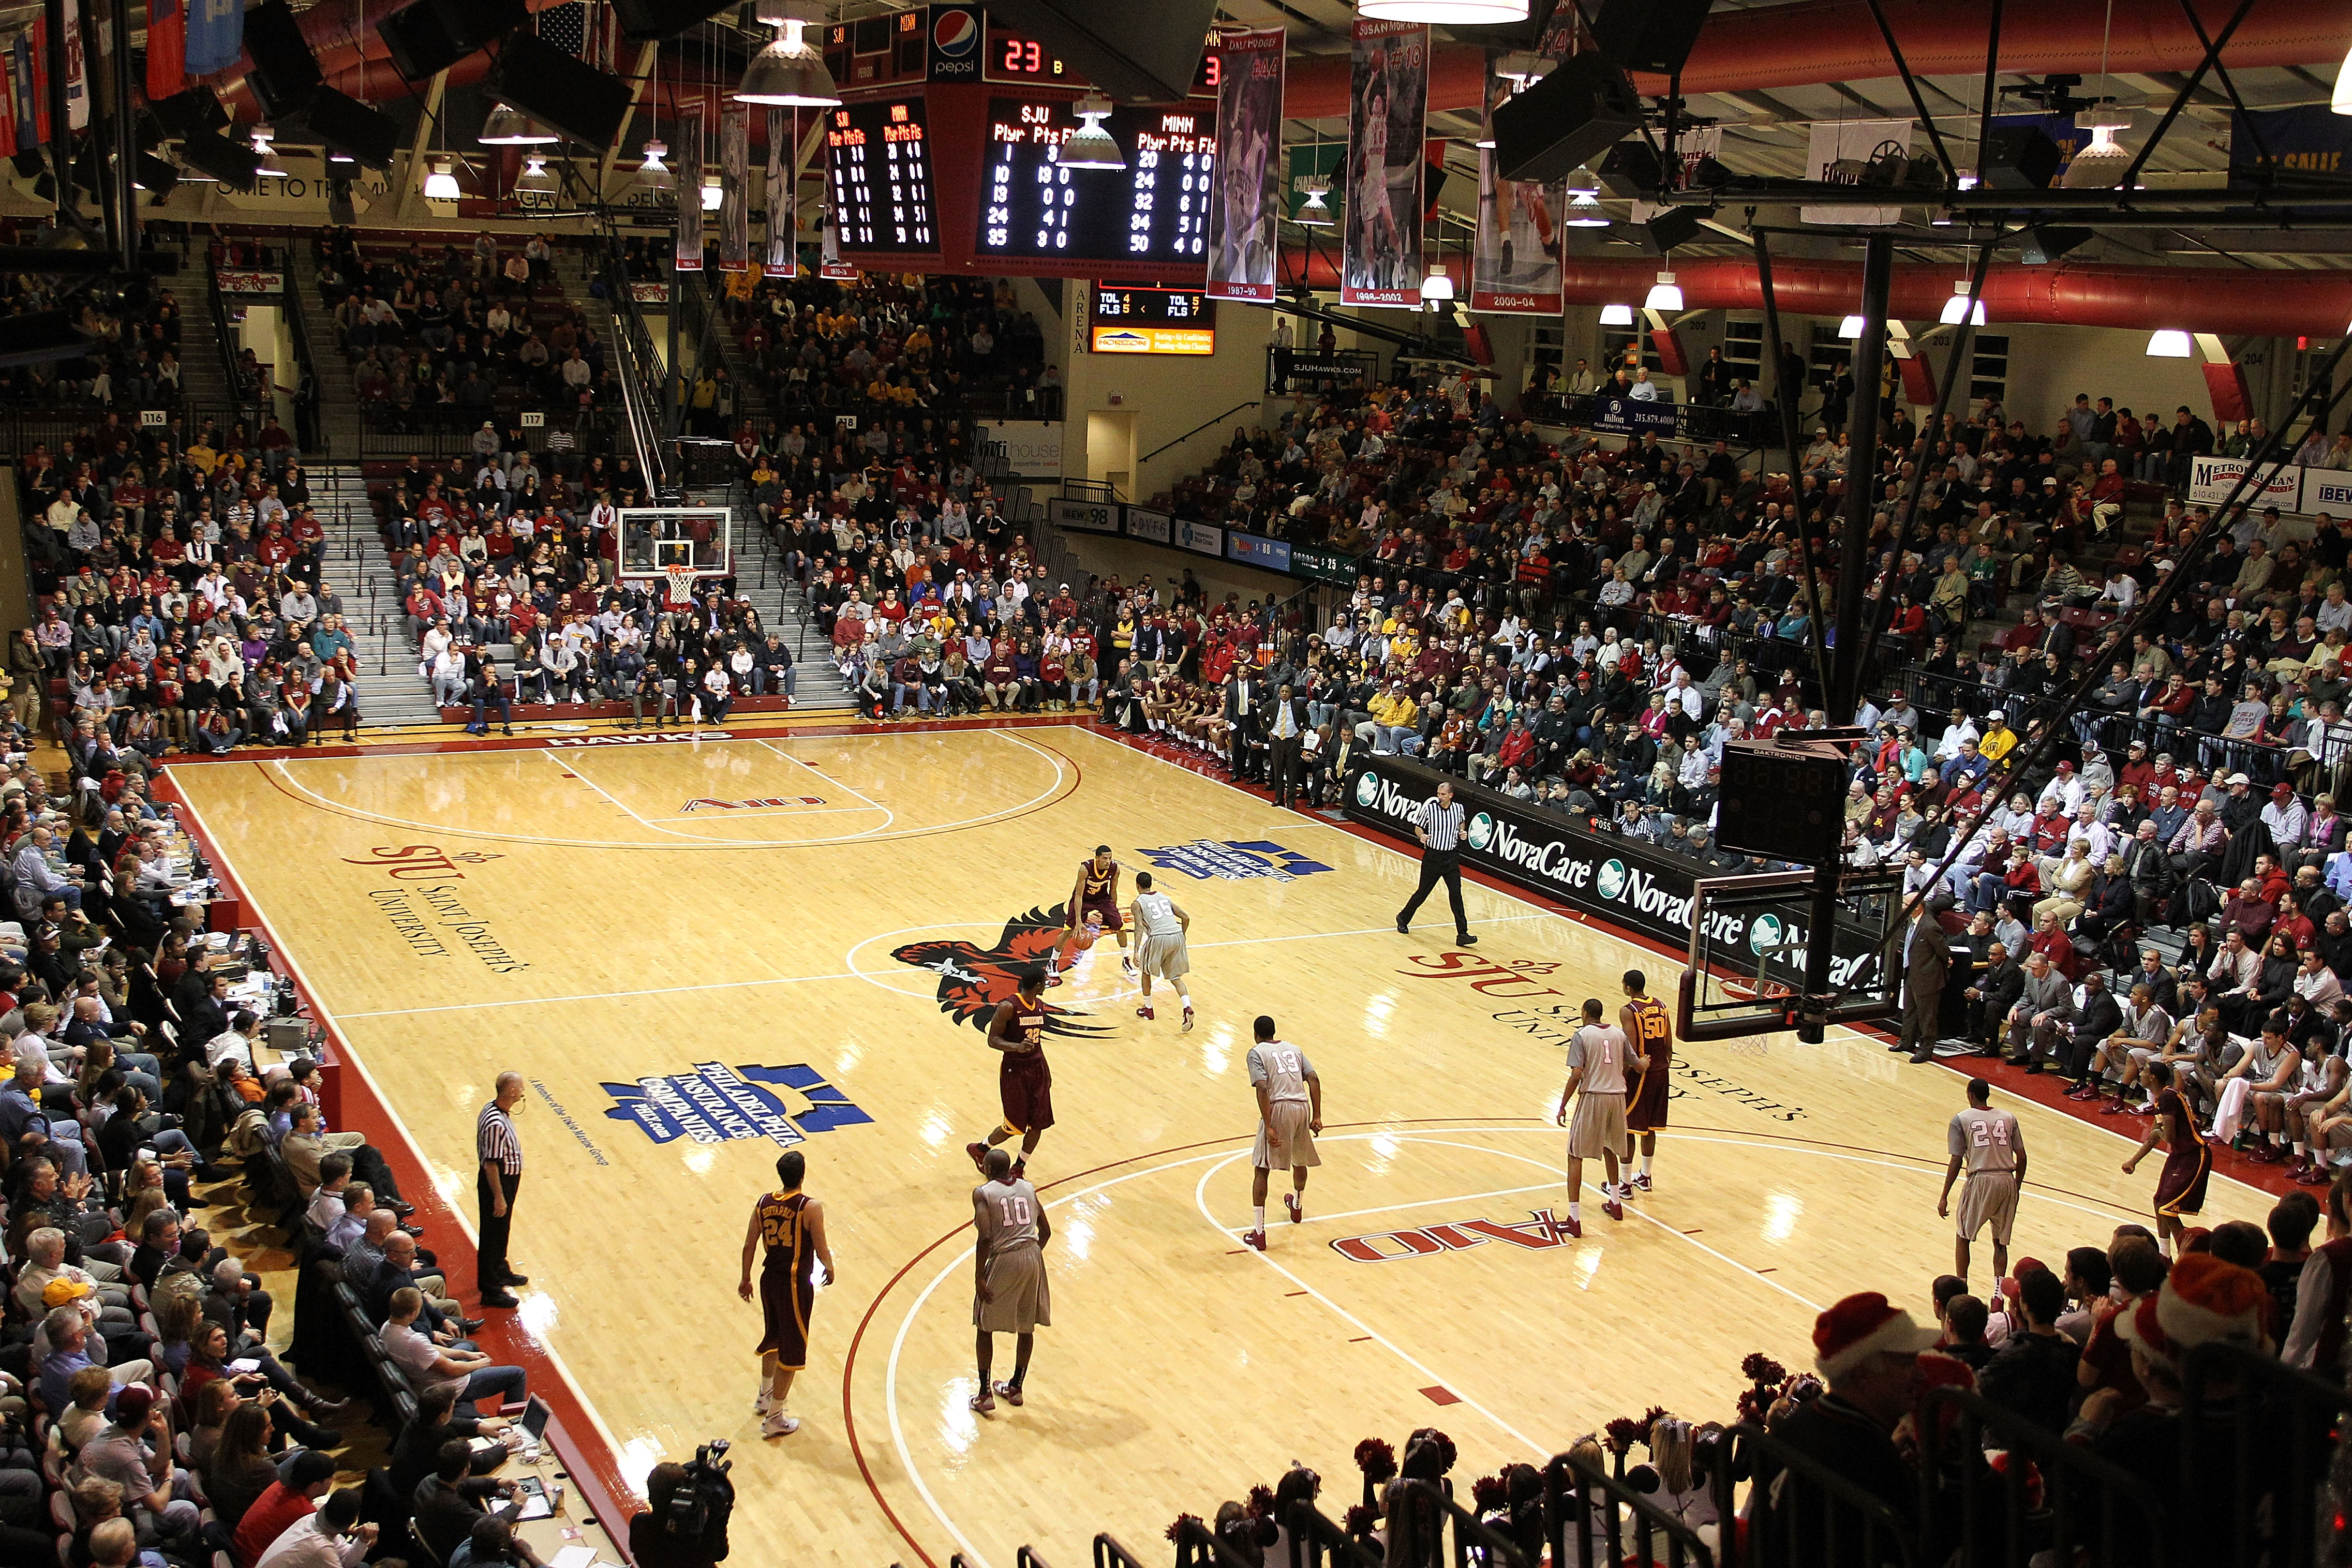 PHILADELPHIA, PA - DECEMBER 08:  A general view of the St. Joseph's Hawks playing defense against the Minnesota Golden Gophers at Michael J. Hagan Arena on December 8, 2010 in Philadelphia, Pennsylvania.  (Photo by Chris Chambers/Getty Images)